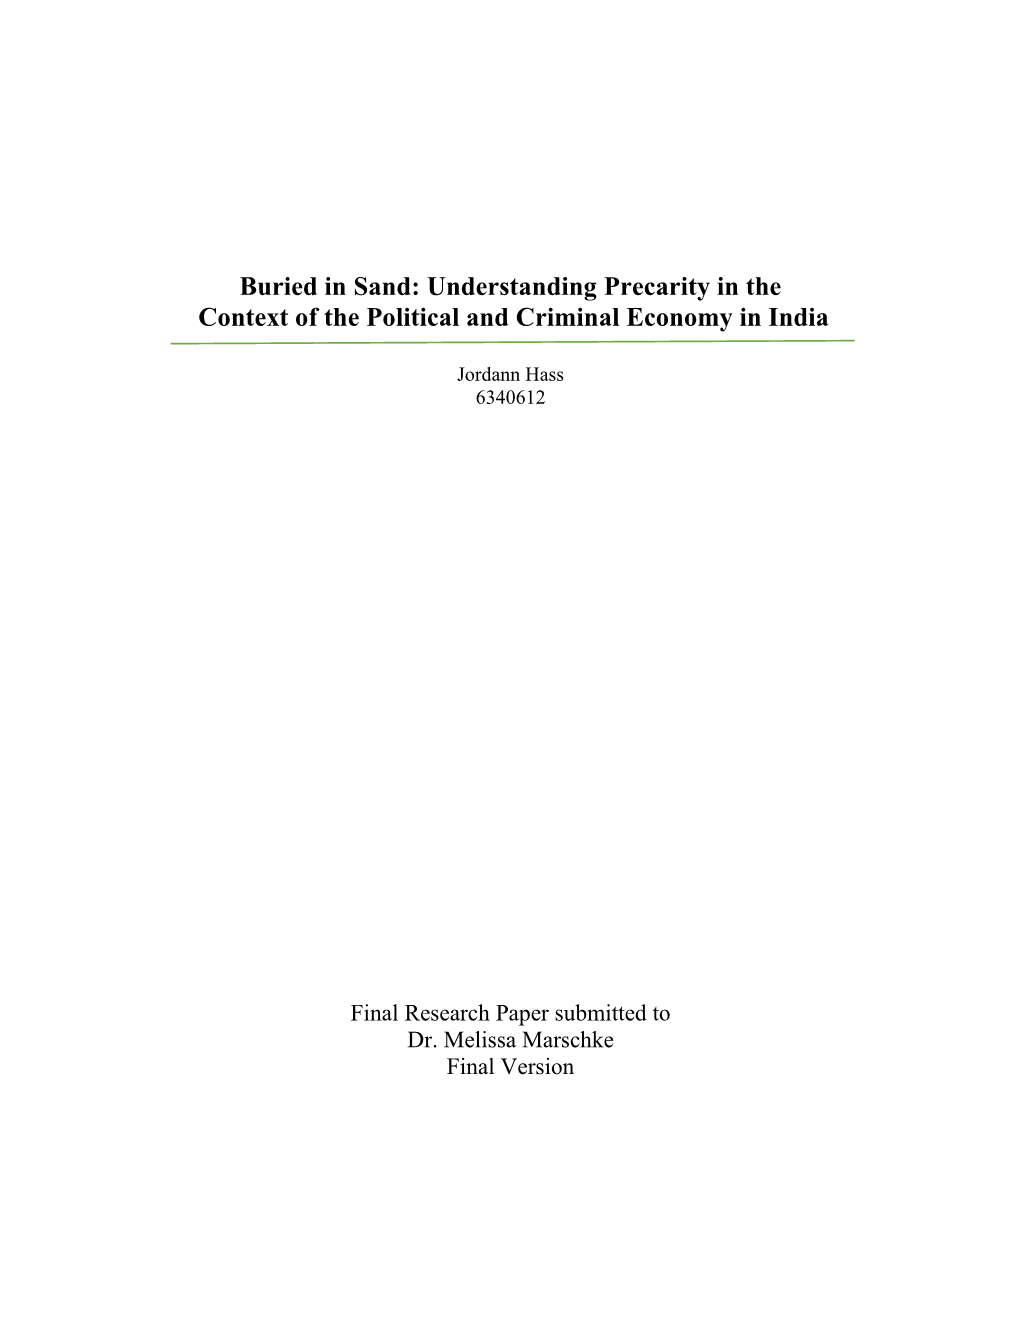 Understanding Precarity in the Context of the Political and Criminal Economy in India